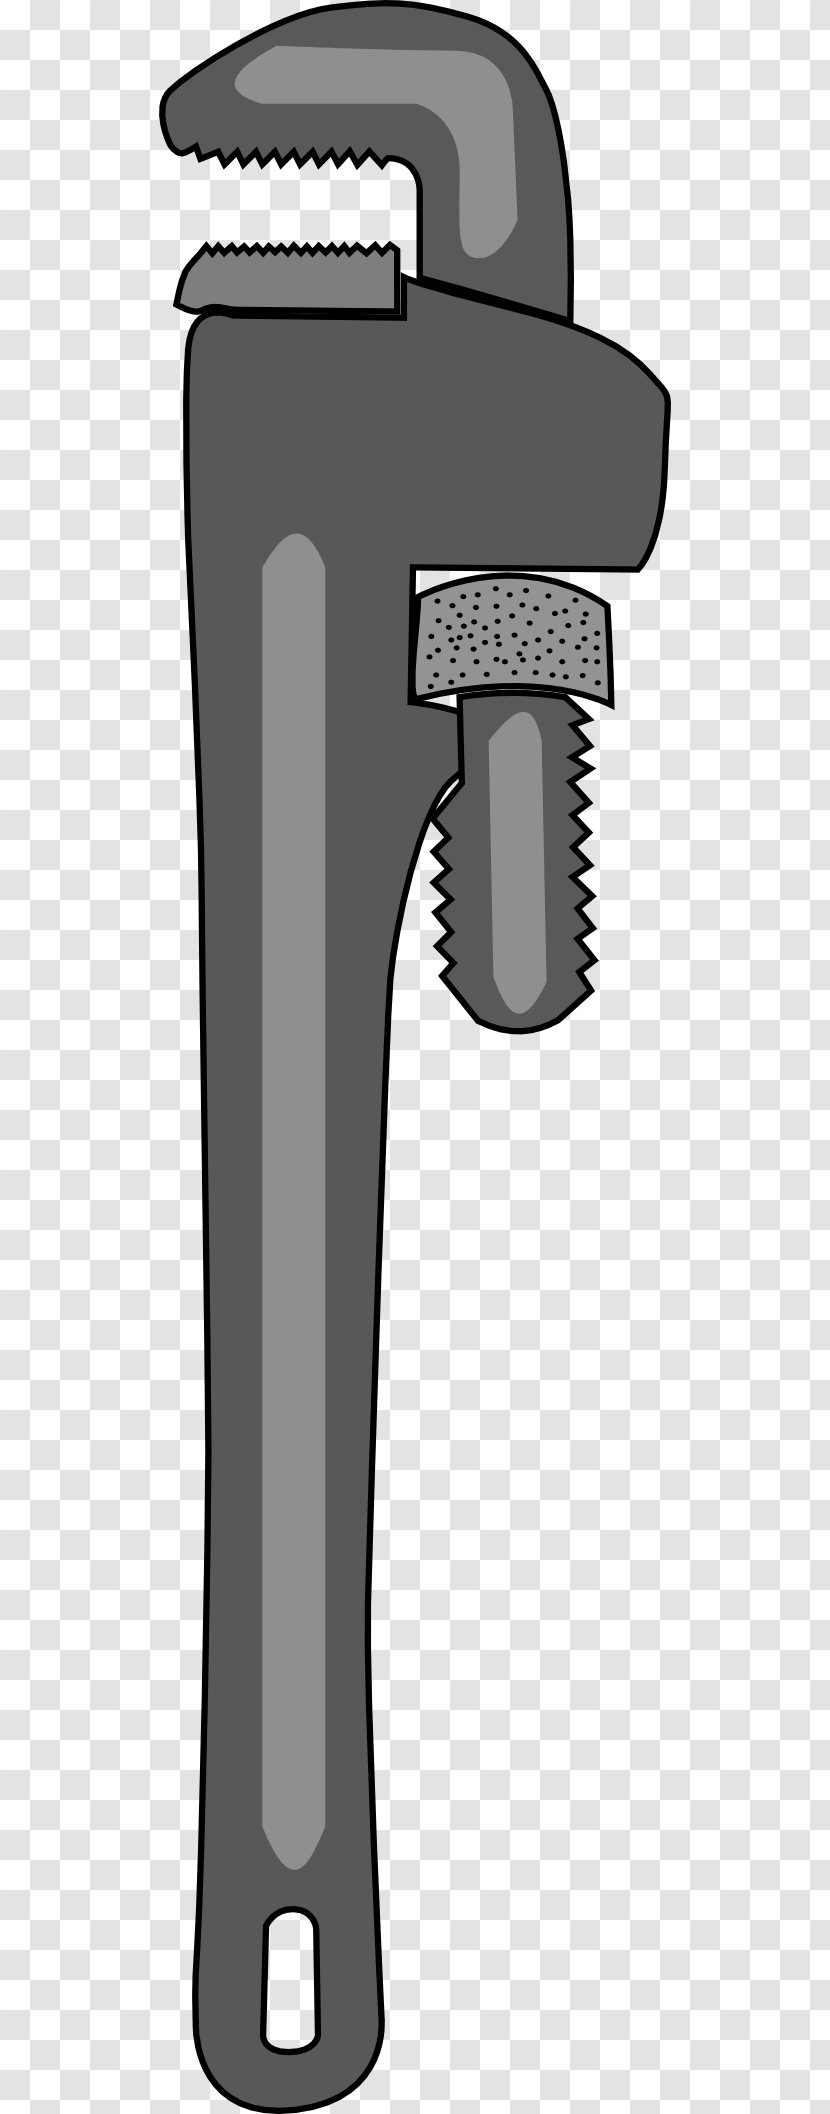 Pipe Wrench Plumber Plumbing Clip Art - Tool - Pipes Cliparts Transparent PNG